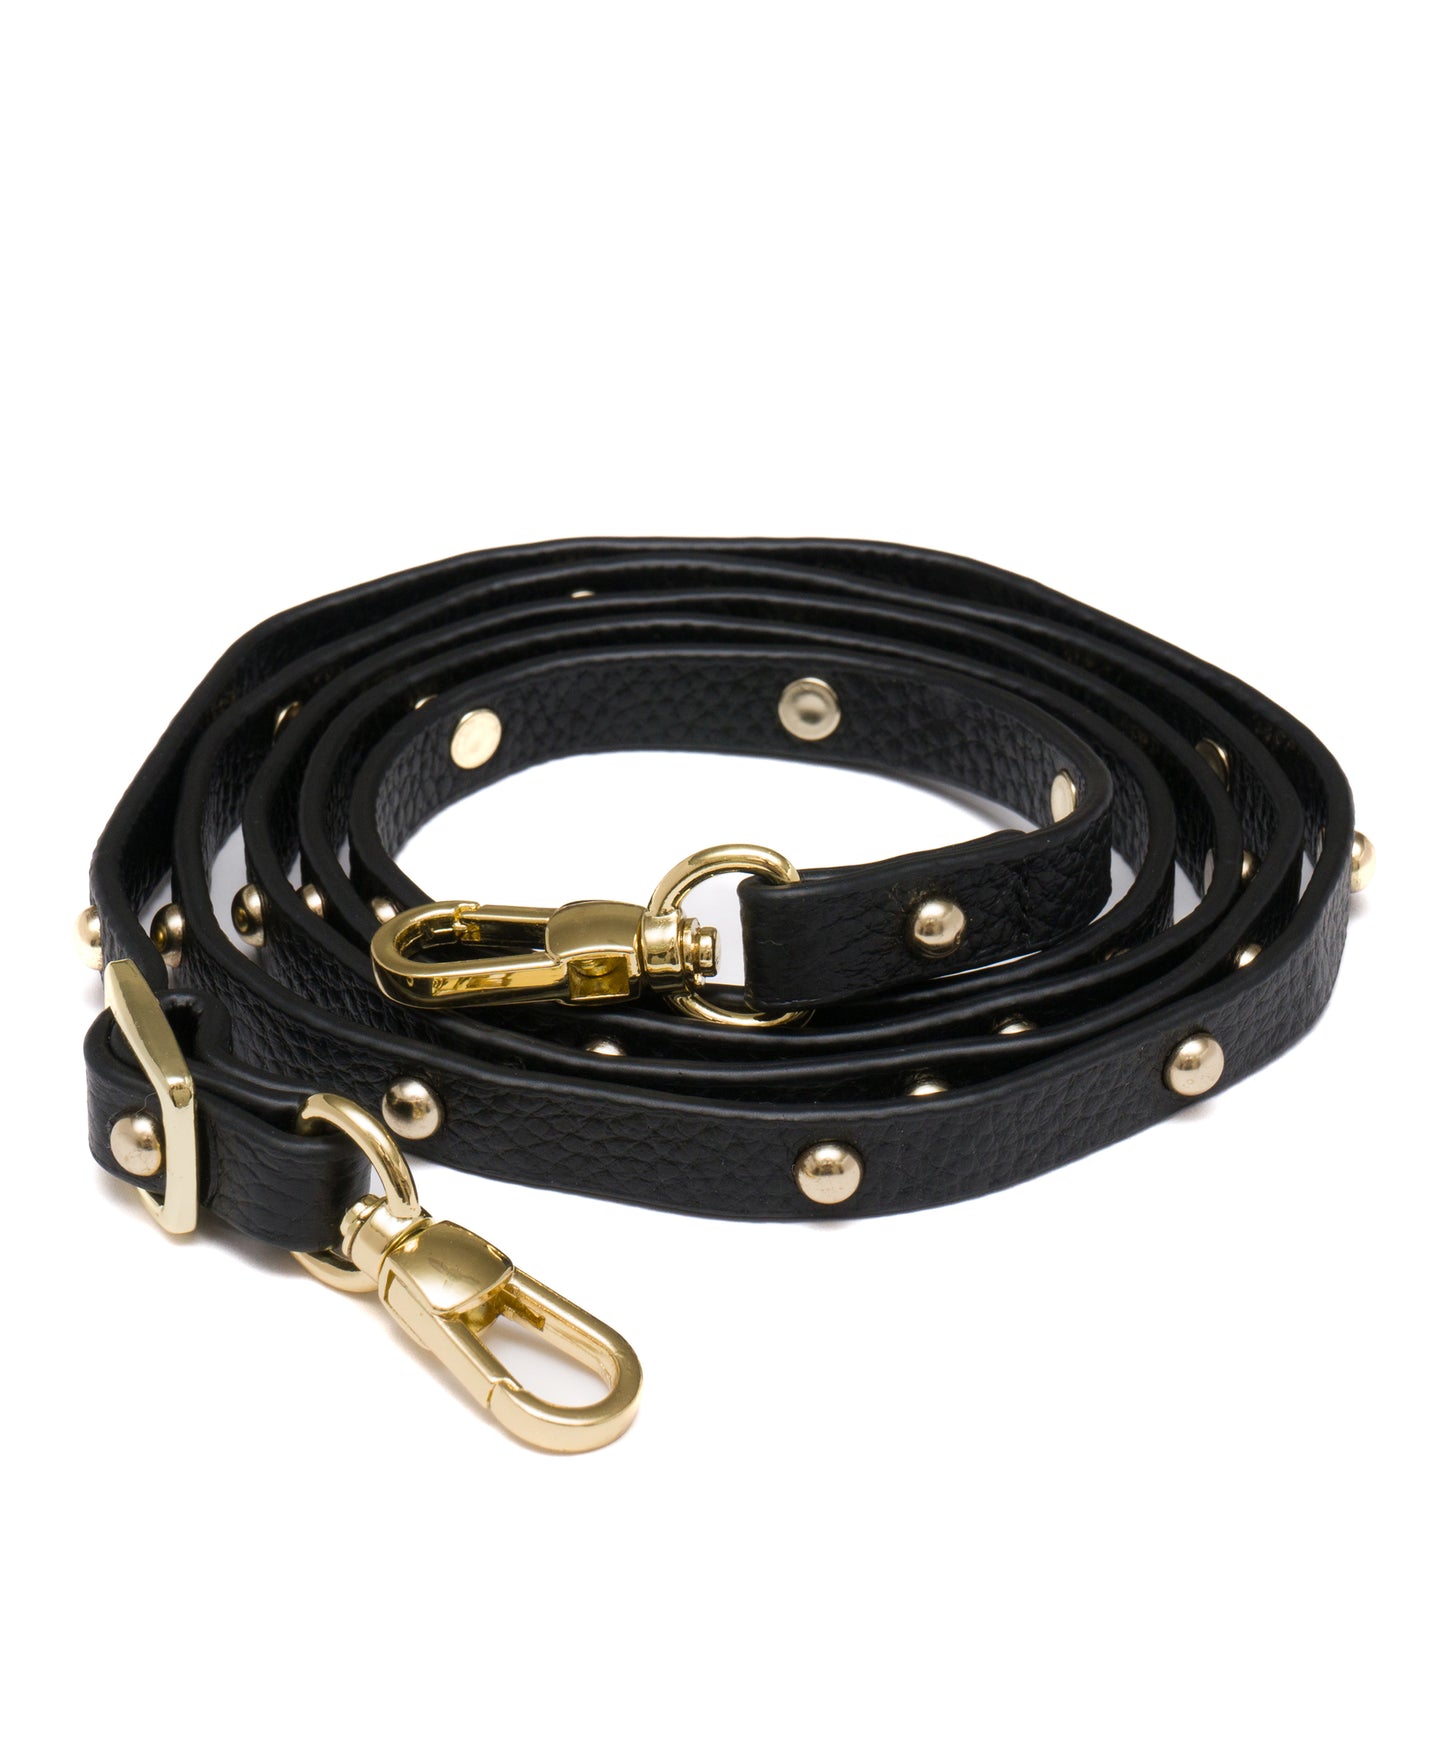 Black / Gold Round Leather Studded Strap